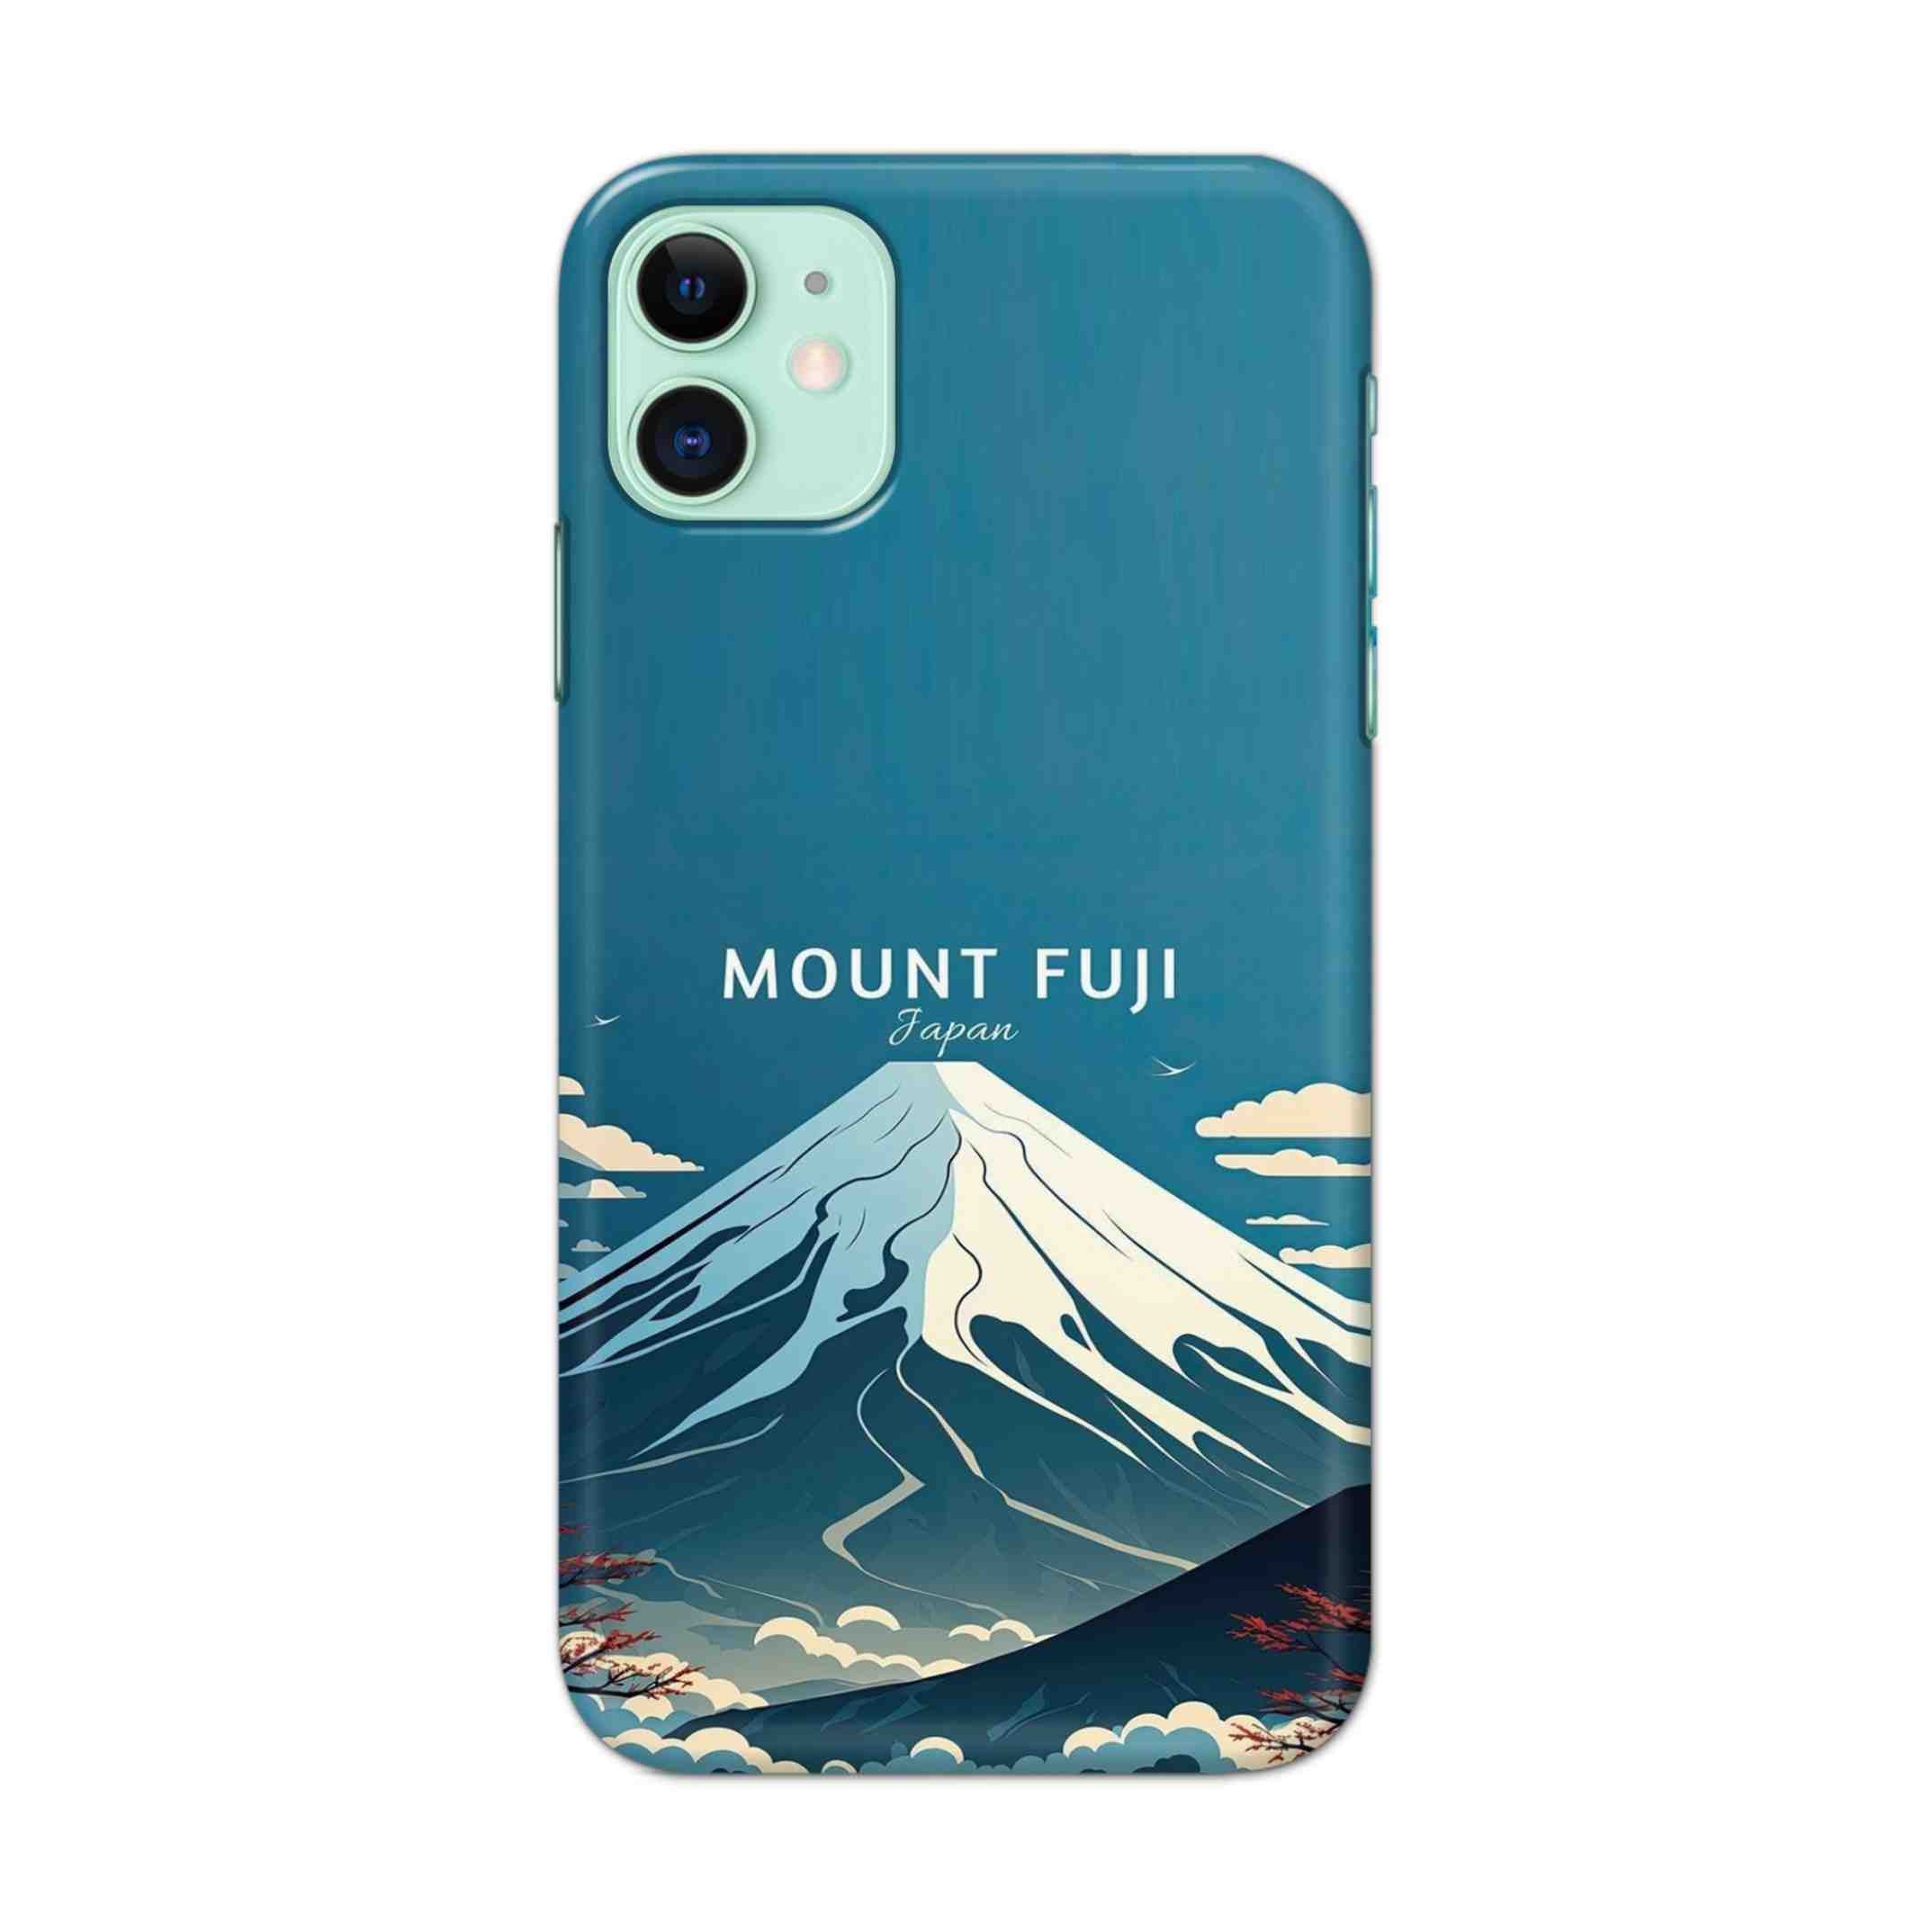 Buy Mount Fuji Hard Back Mobile Phone Case/Cover For iPhone 11 Online